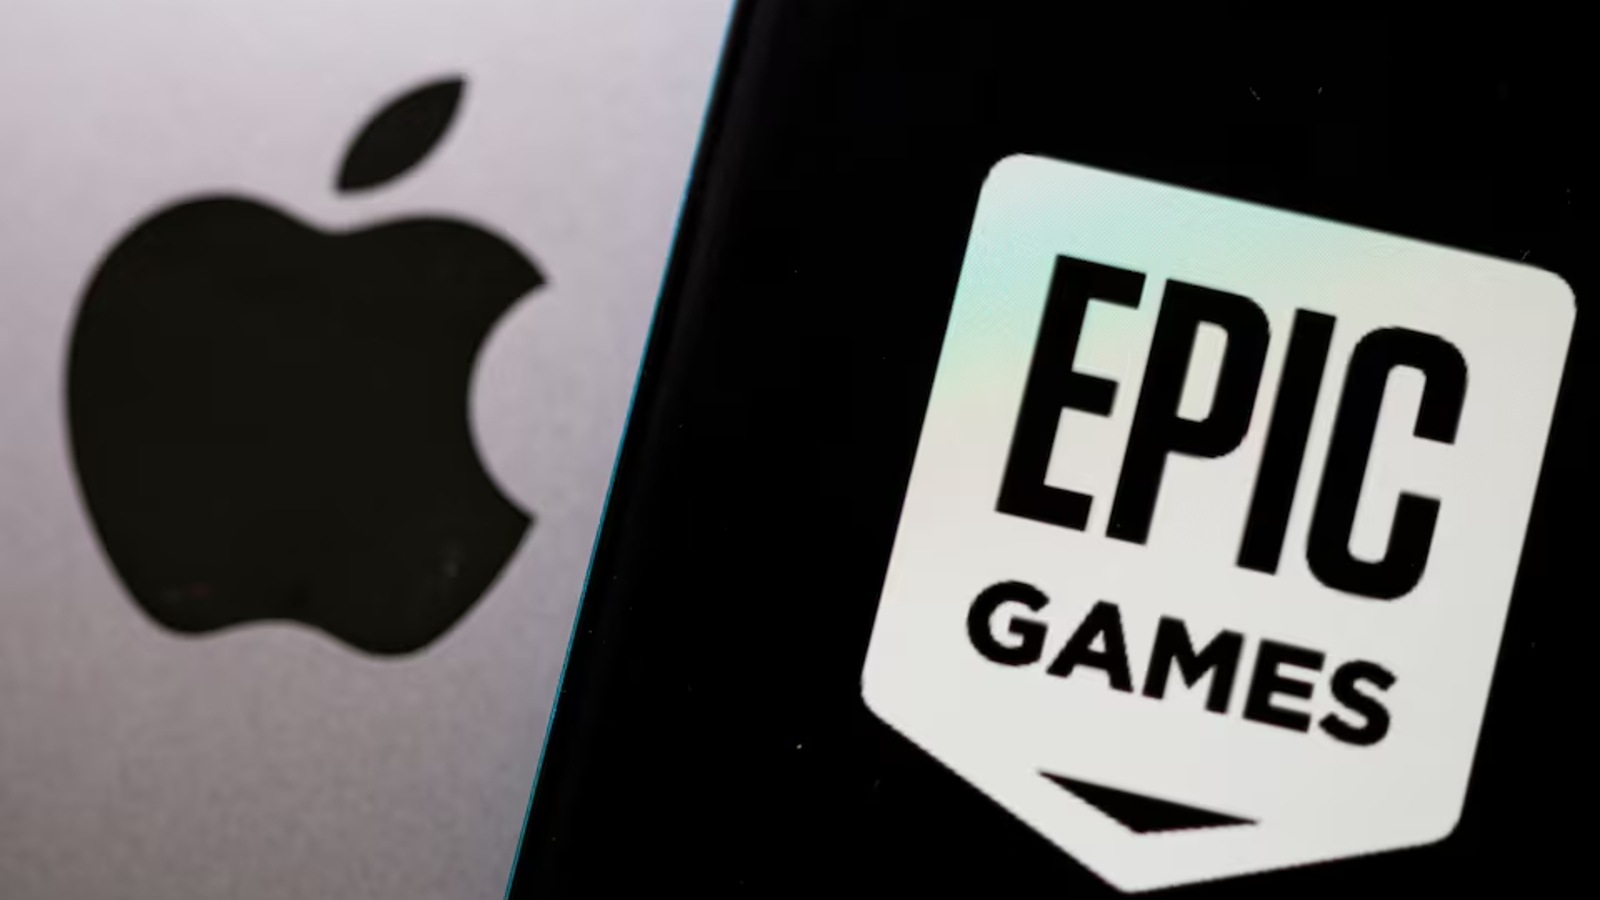 Apple approves Epic Games marketplace app for use in Europe